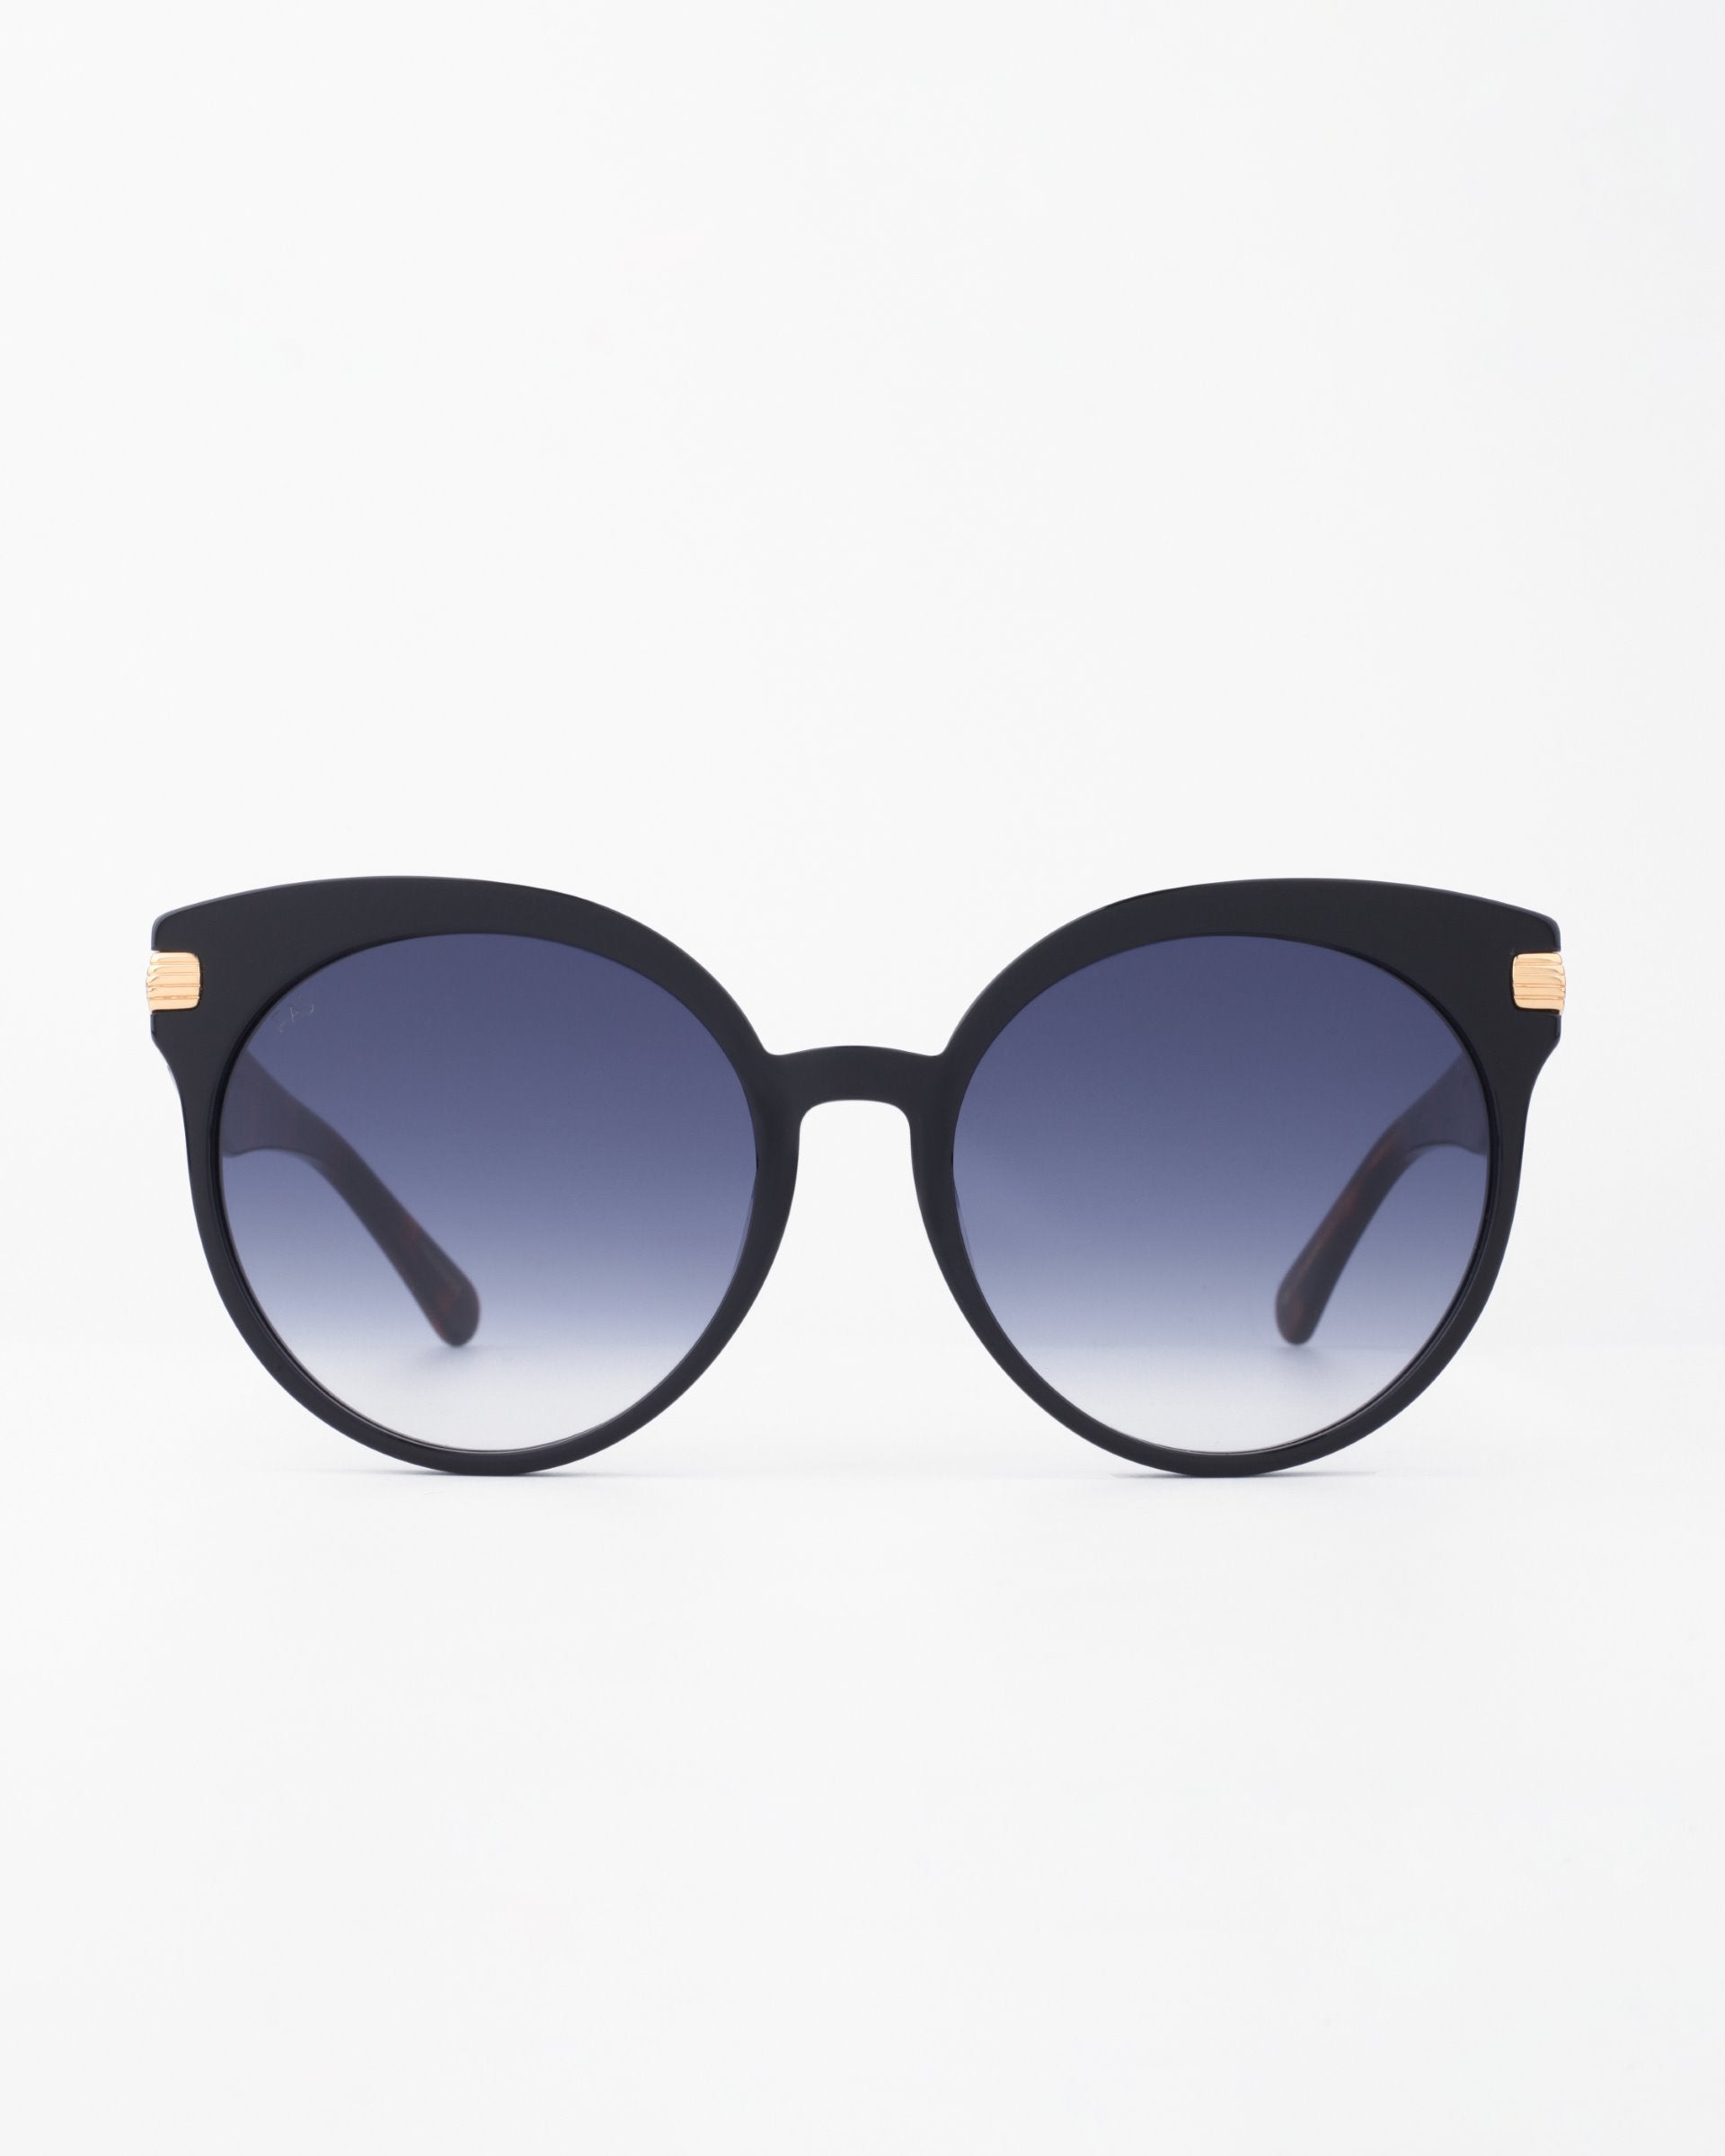 A pair of For Art's Sake® Muse sunglasses with round, shatter-resistant nylon lenses that transition from dark at the top to lighter at the bottom. The arms, crafted from handmade plant-based acetate, feature an 18-karat gold-plated temple near the hinges. The background is plain white.